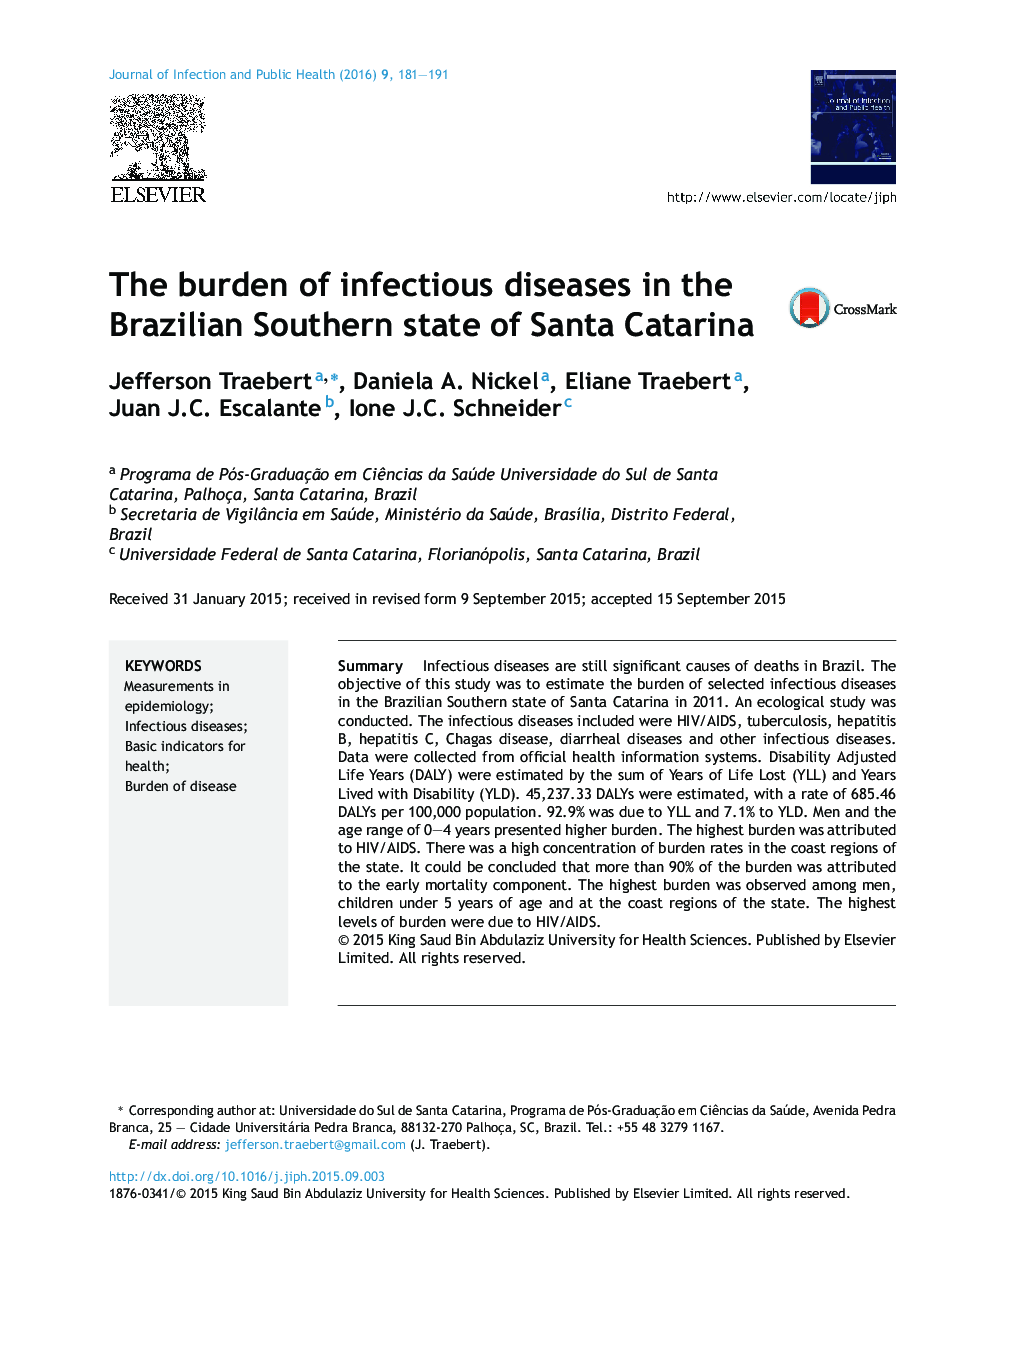 The burden of infectious diseases in the Brazilian Southern state of Santa Catarina